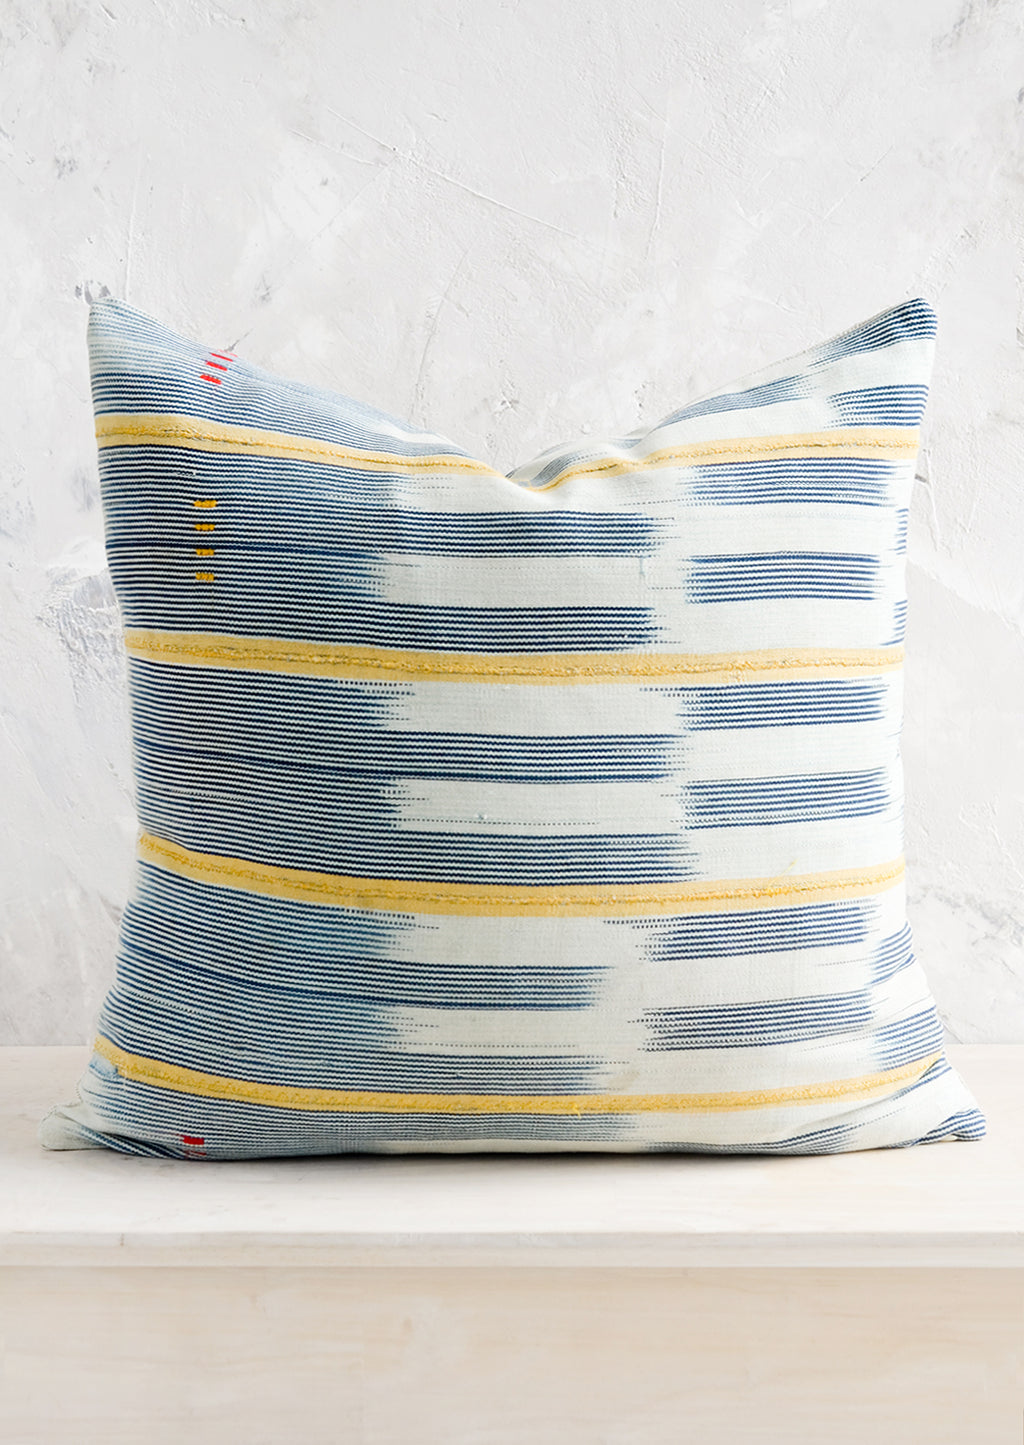 1: A square throw pillow in vintage African baule indigo ikat fabric with yellow accents.